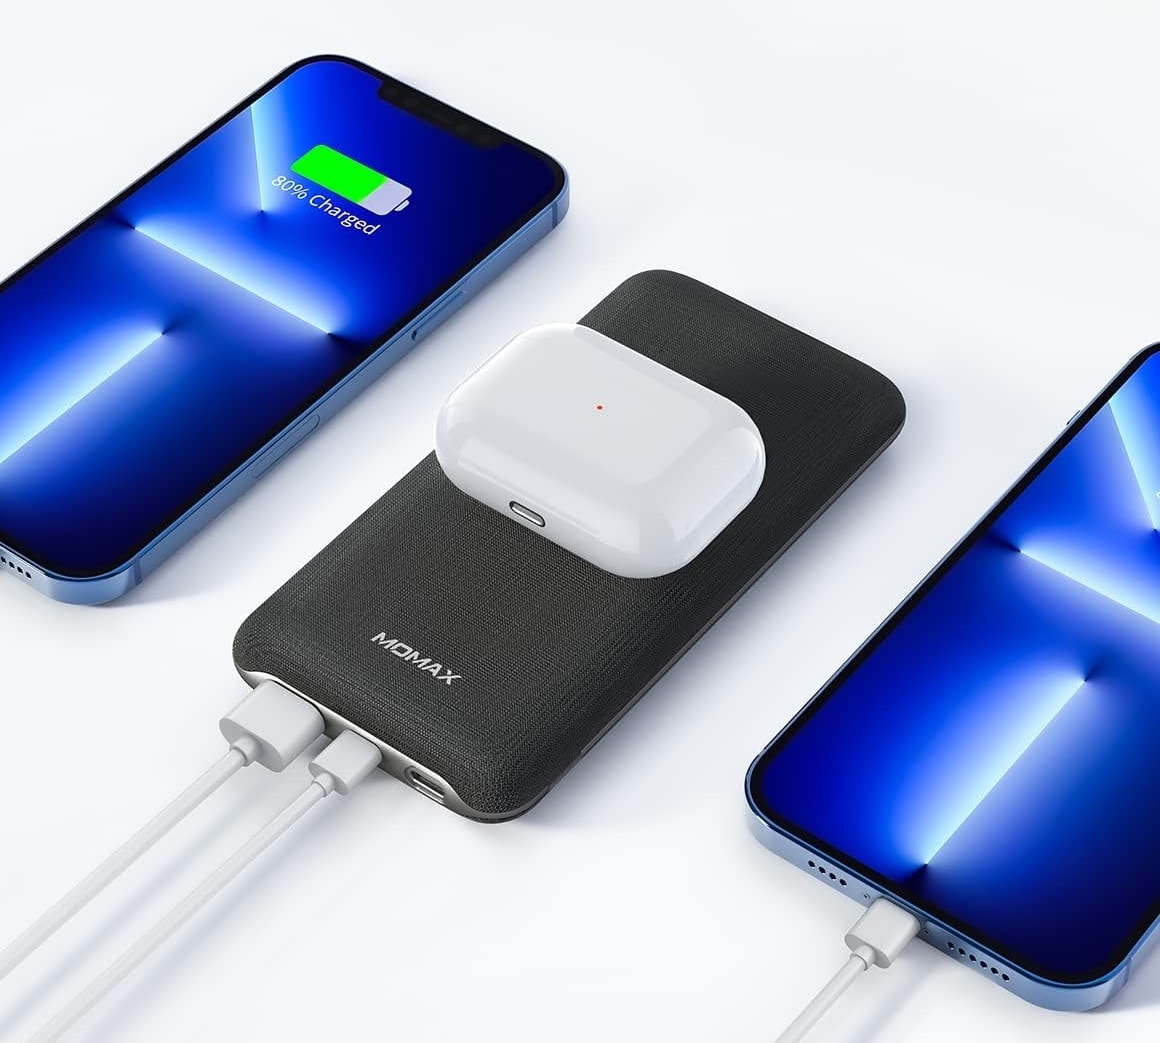 The 10,000mAh power bank has plenty of juice for charging devices on the go.